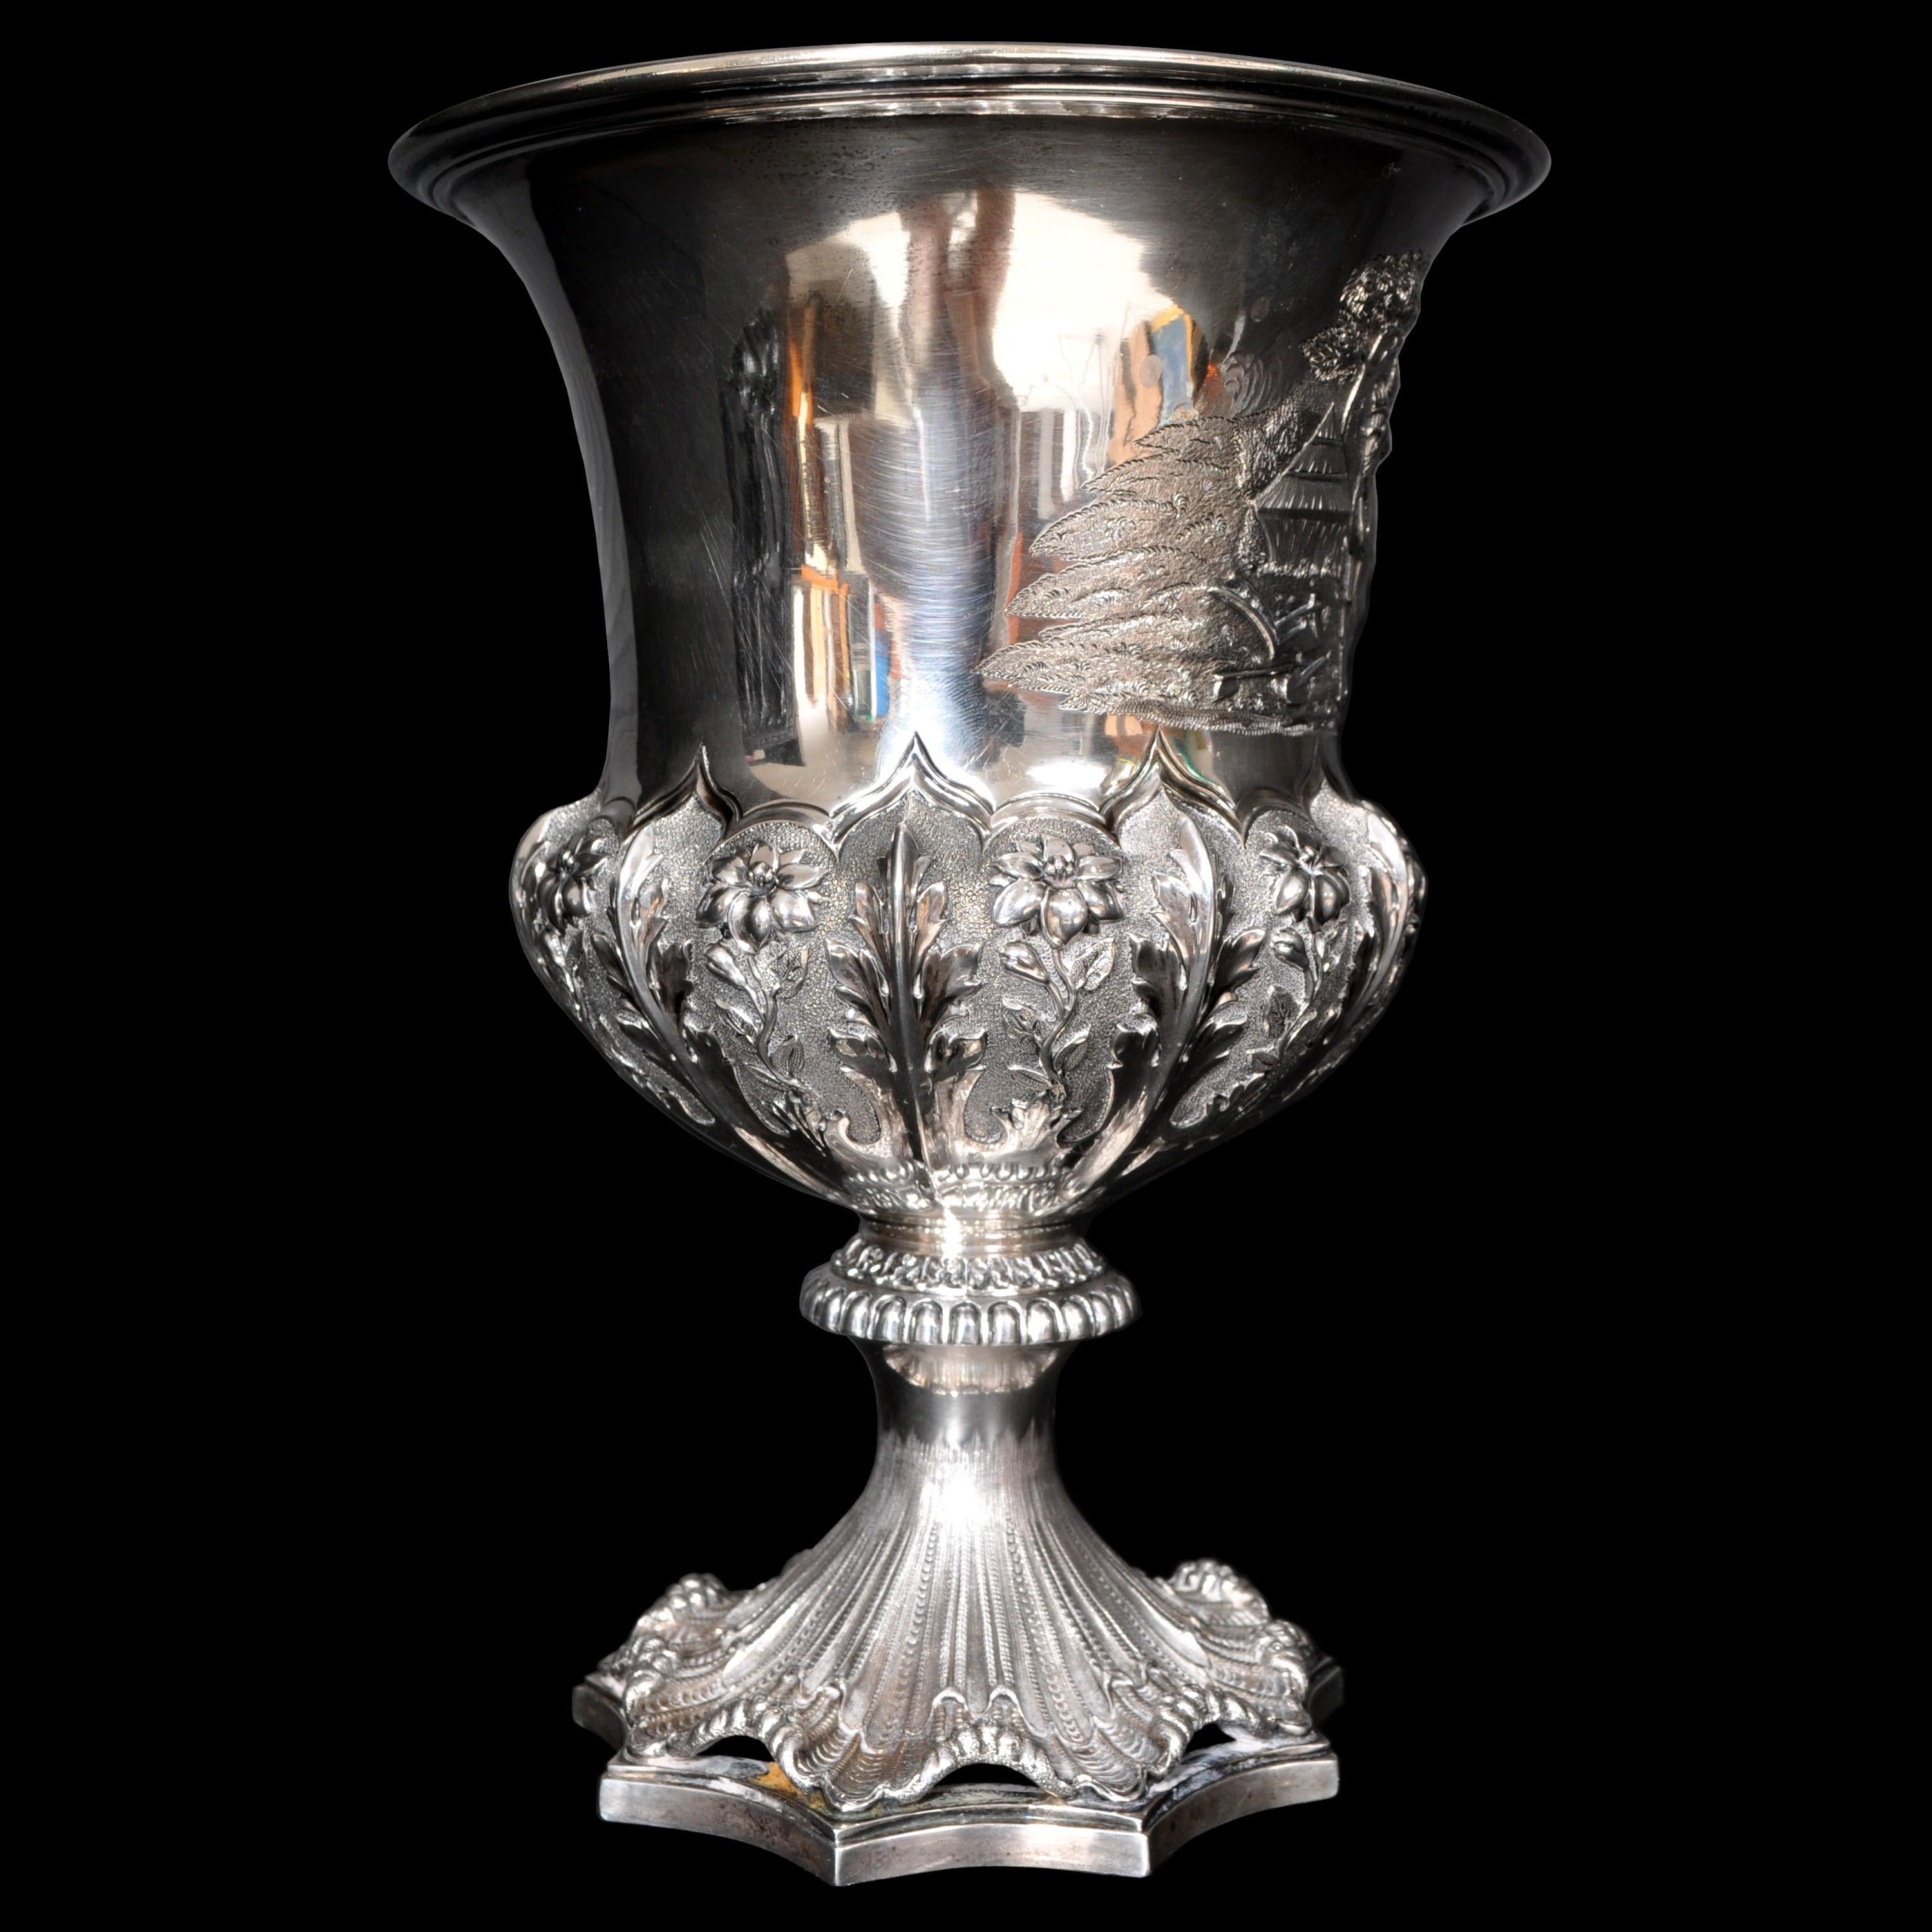 Fine & Rare Antique Sterling Silver William IV London Presentation Cup, 1831 In Excellent Condition For Sale In Portland, OR